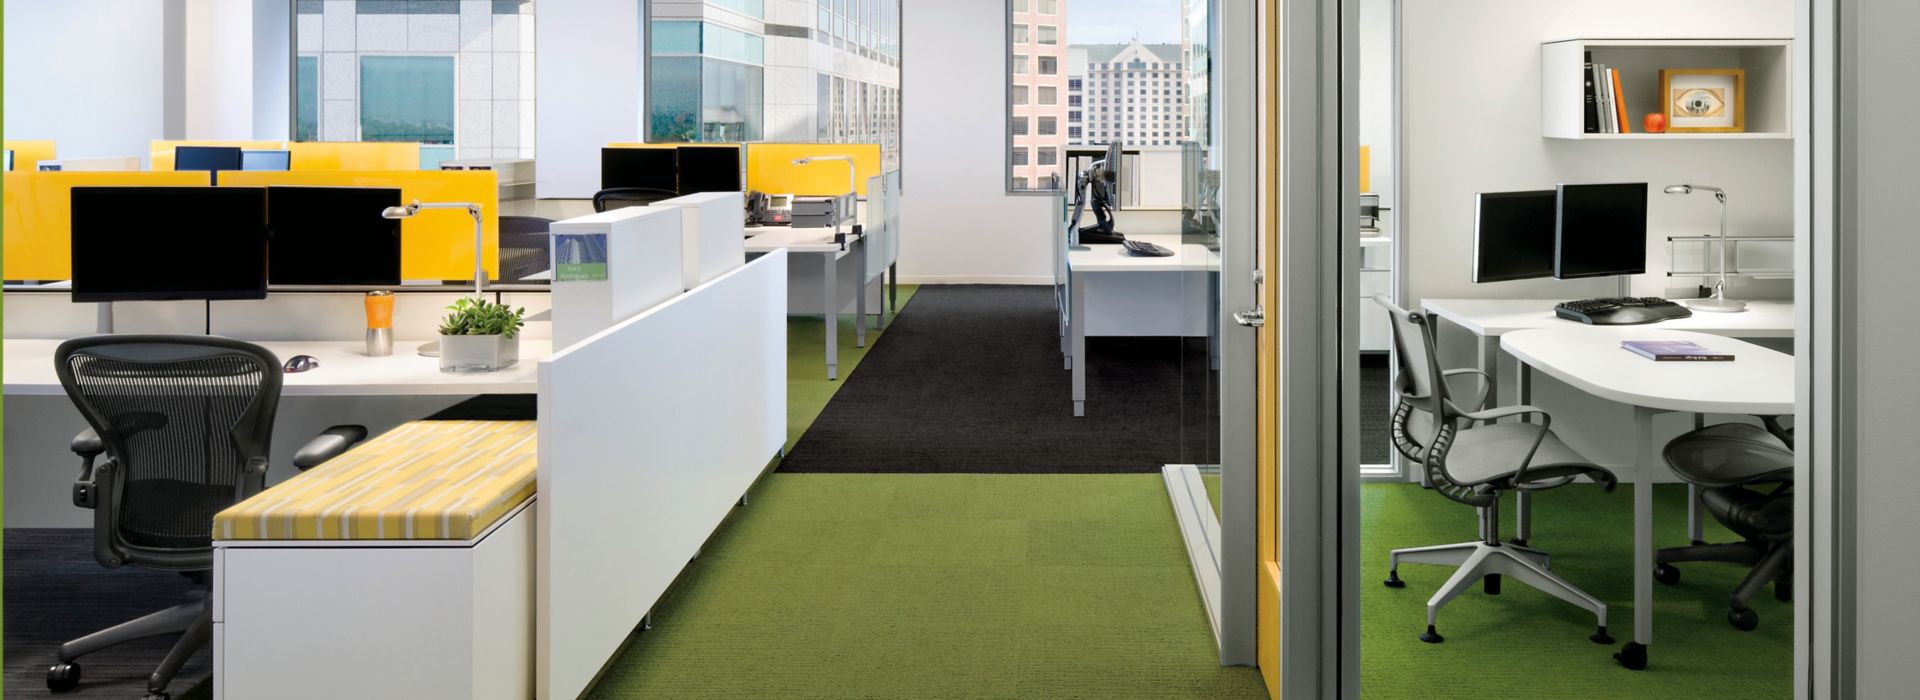 Interface Monochrome and Striation carpet tile in walkway of office with multiple open offices and a private office imagen número 2